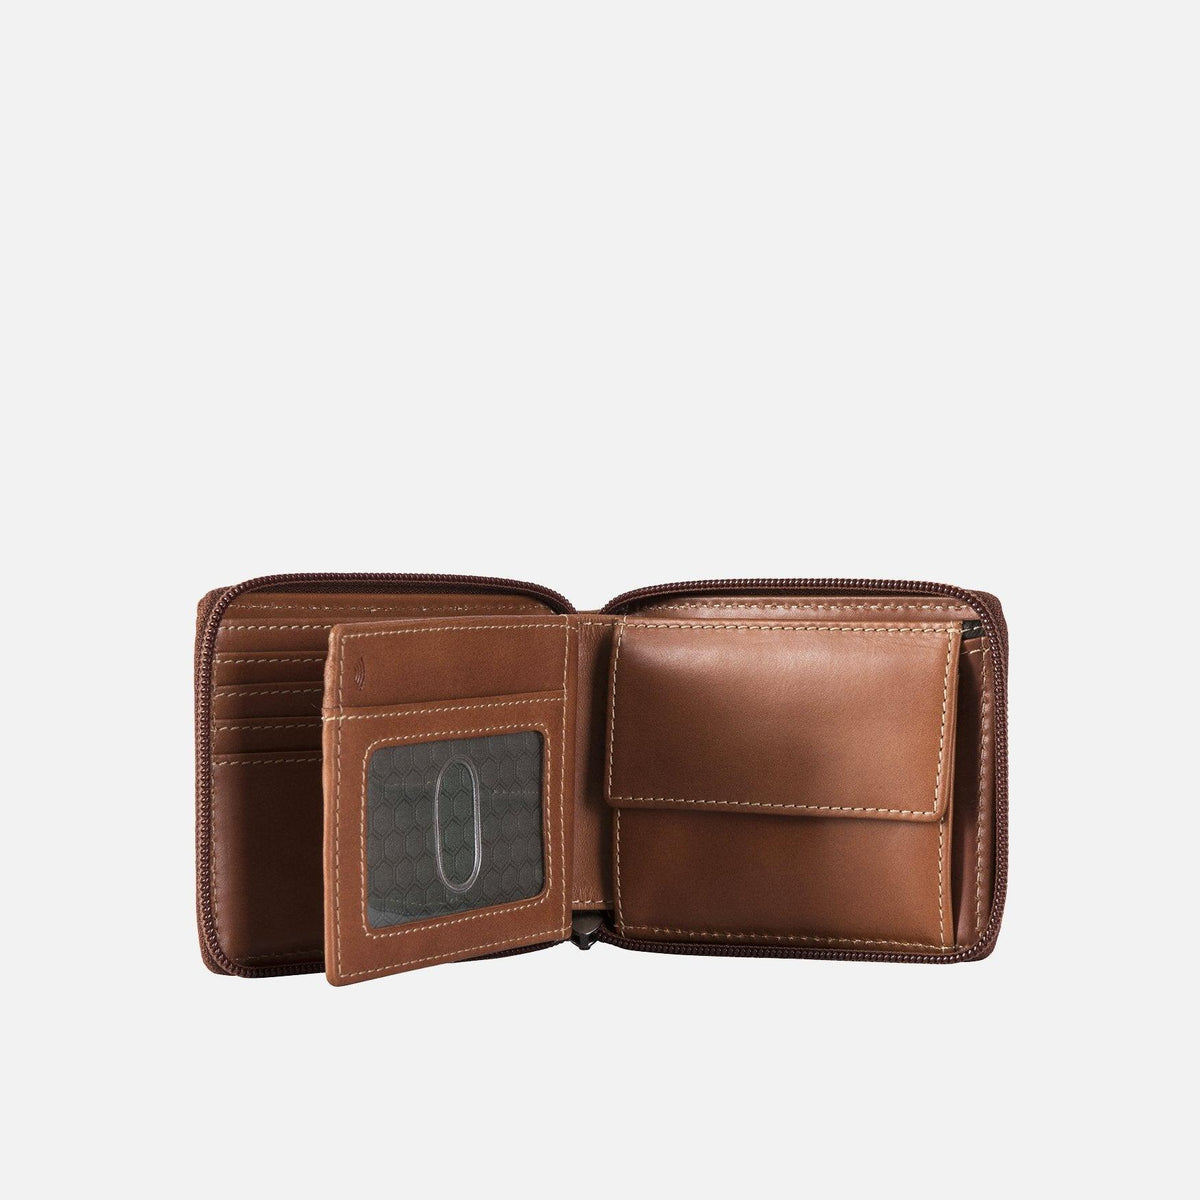 LARGE ZIP AROUND WALLET WITH COIN, CLAY-4295TECLG - Harrys for Menswear